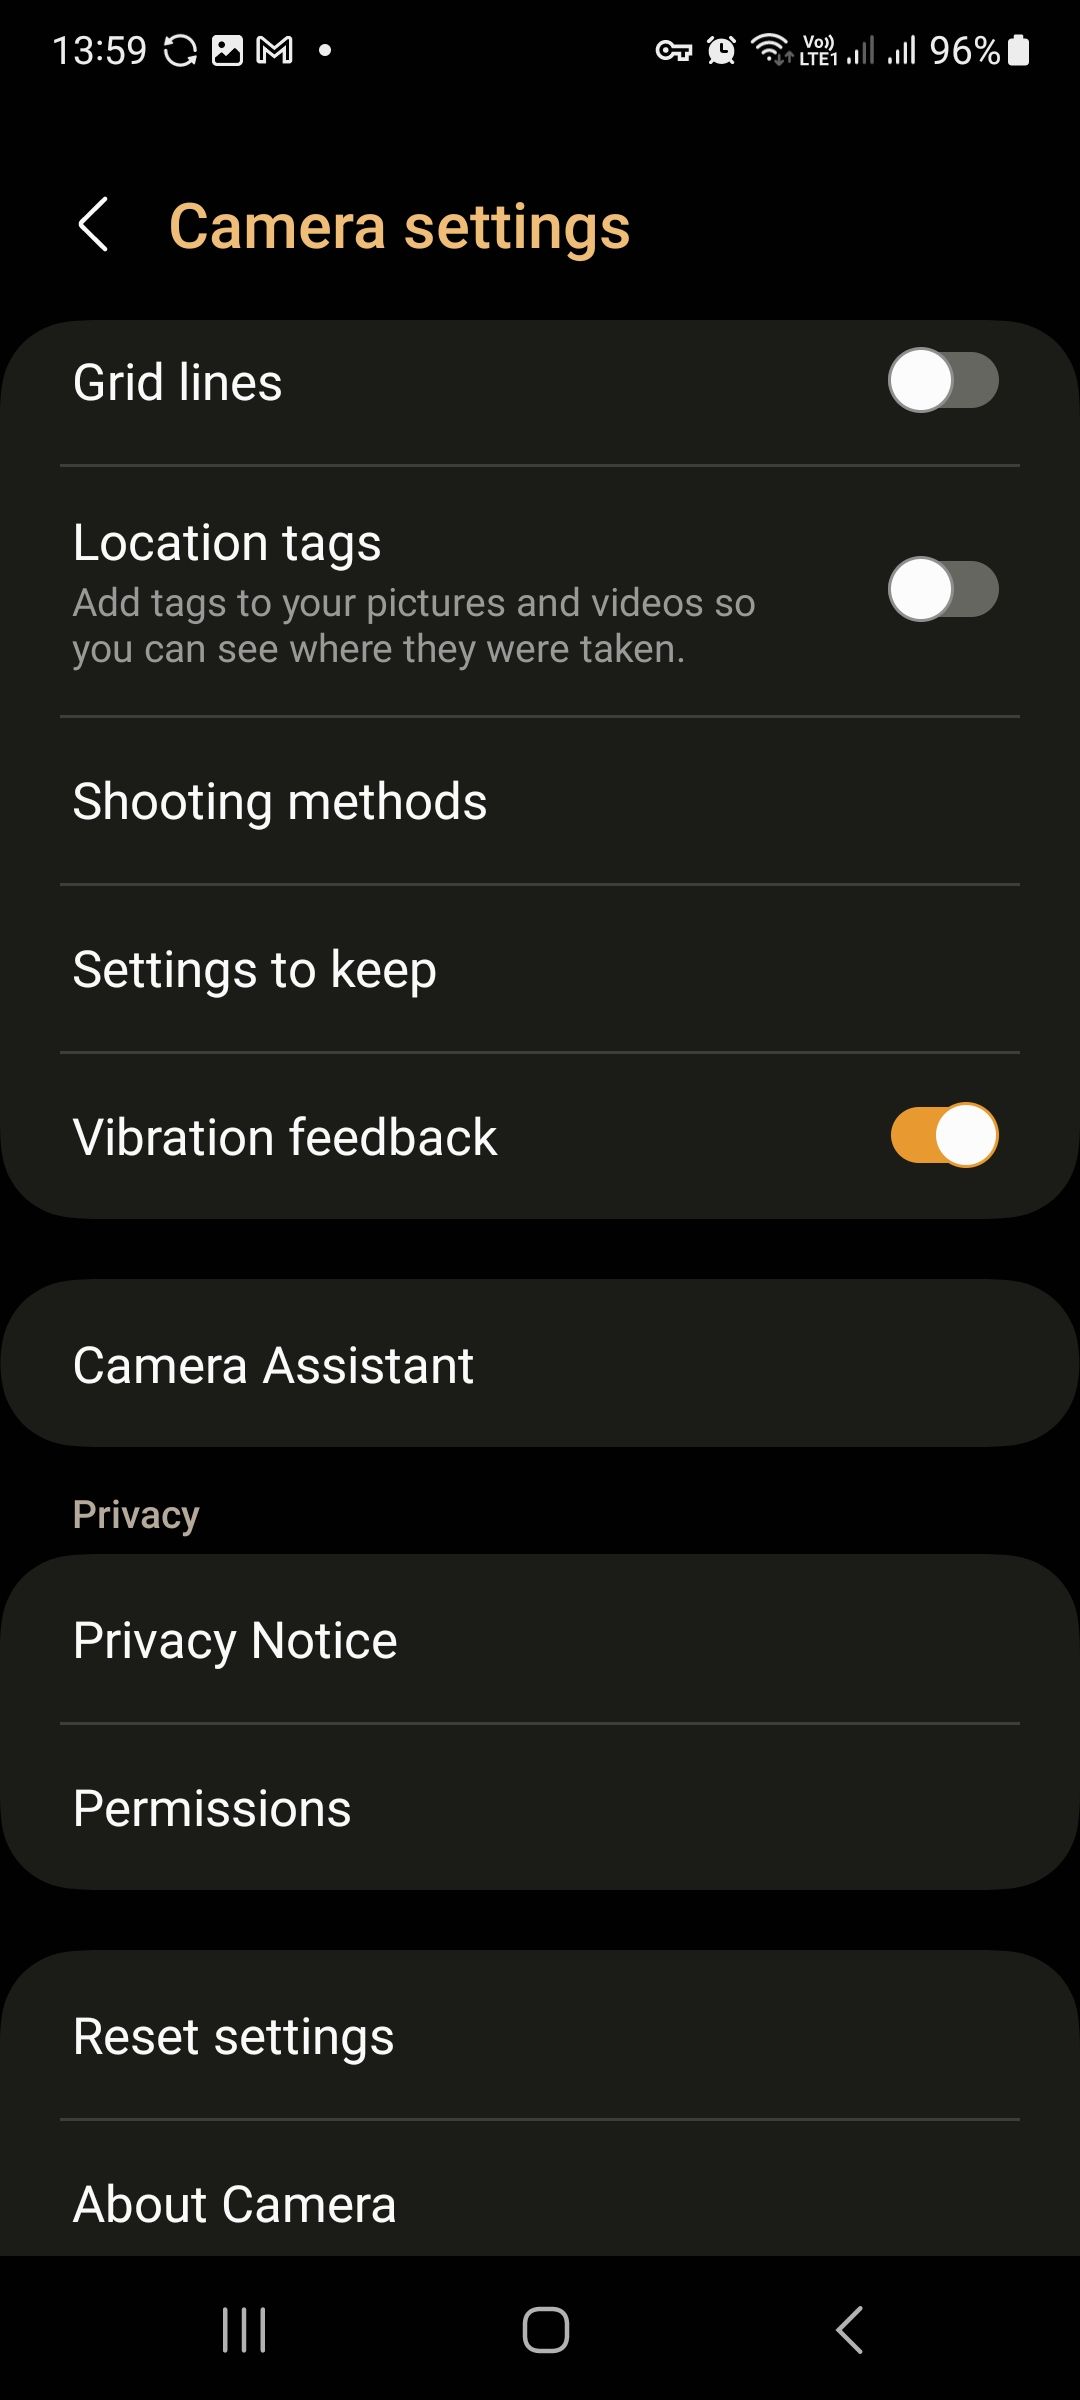 the camera assistant menu added to camera settings